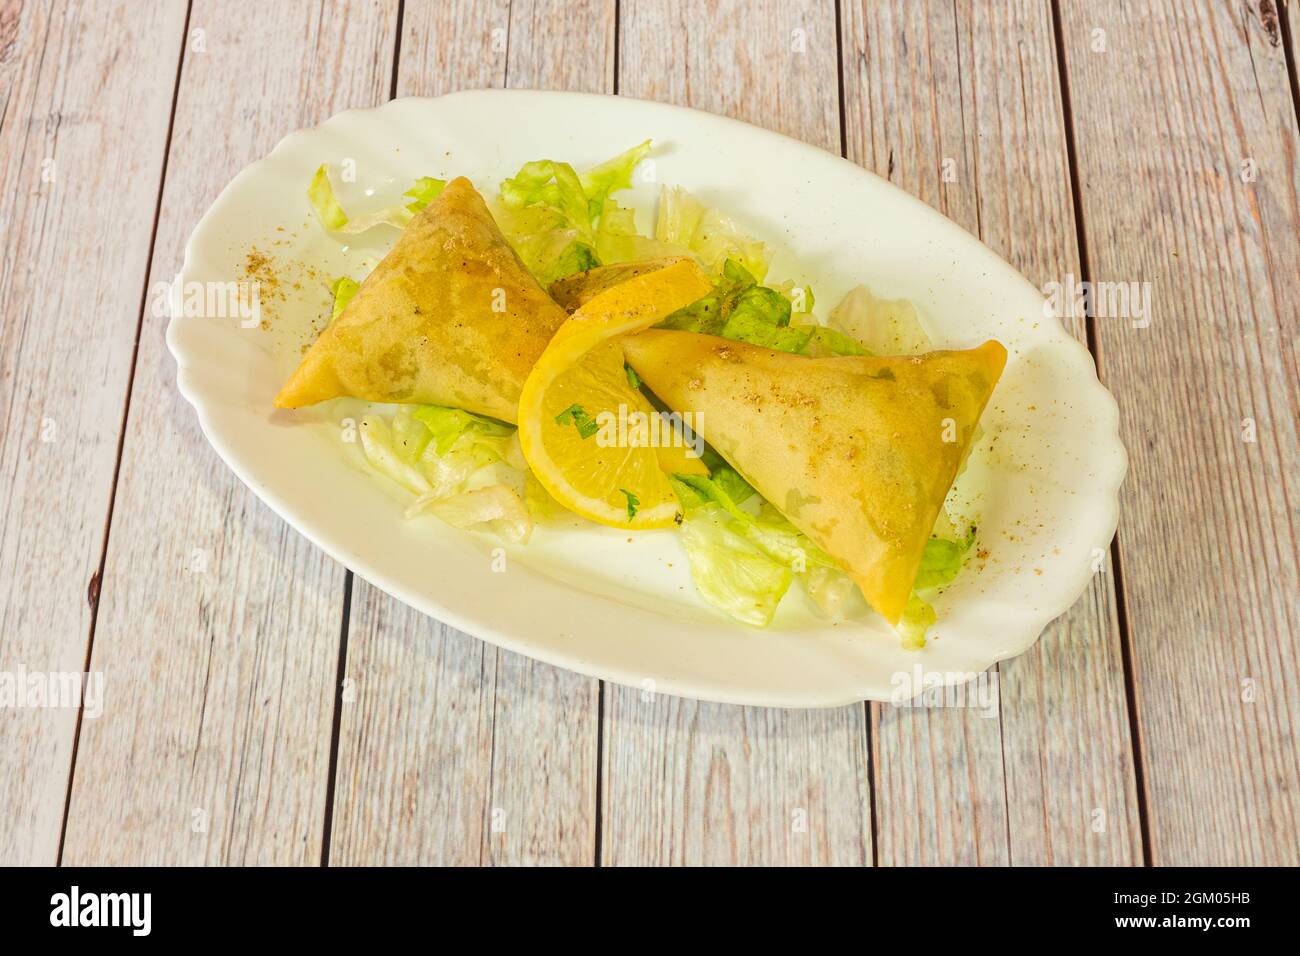 Portion of vegetable samosa served in a Hindu restaurant with iceberg lettuce and a slice of lemon with pepper and ground curry Stock Photo